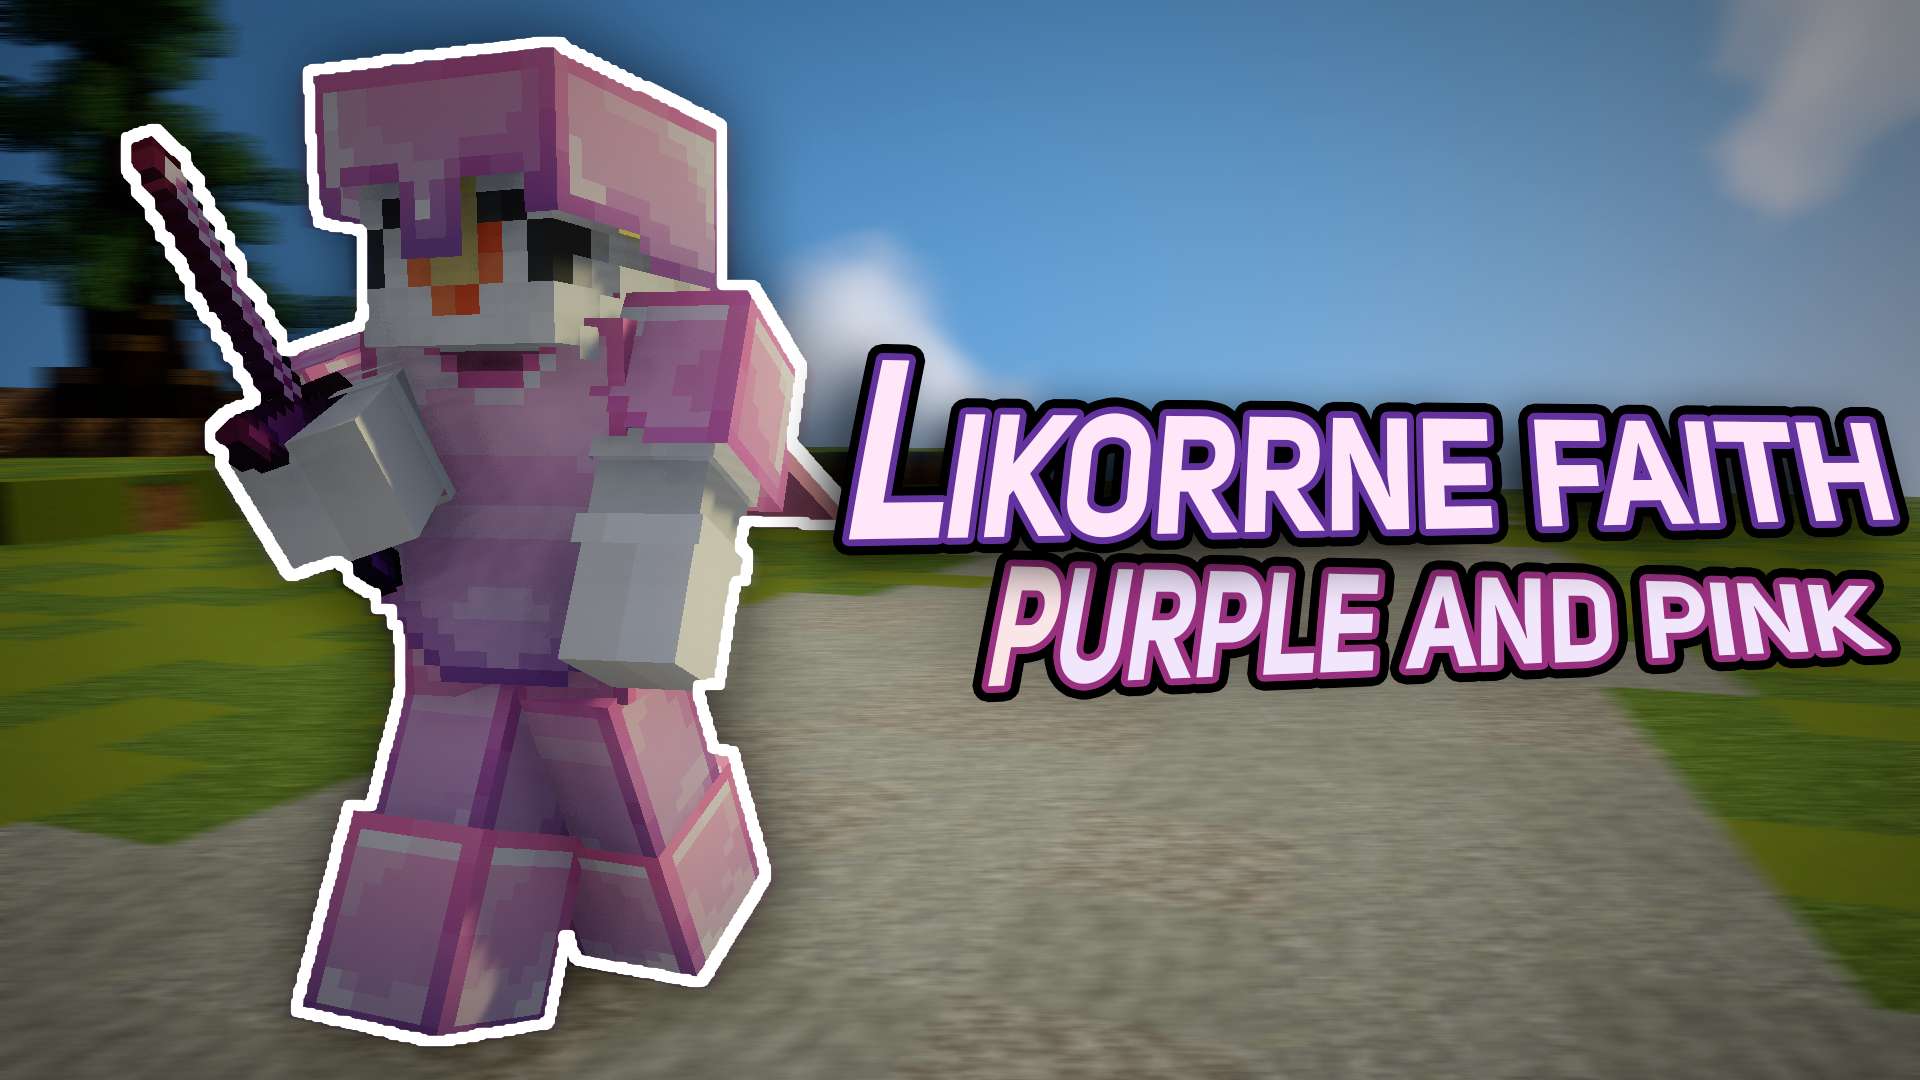 Gallery Banner for Likorrne Faith (Purple and pink) on PvPRP